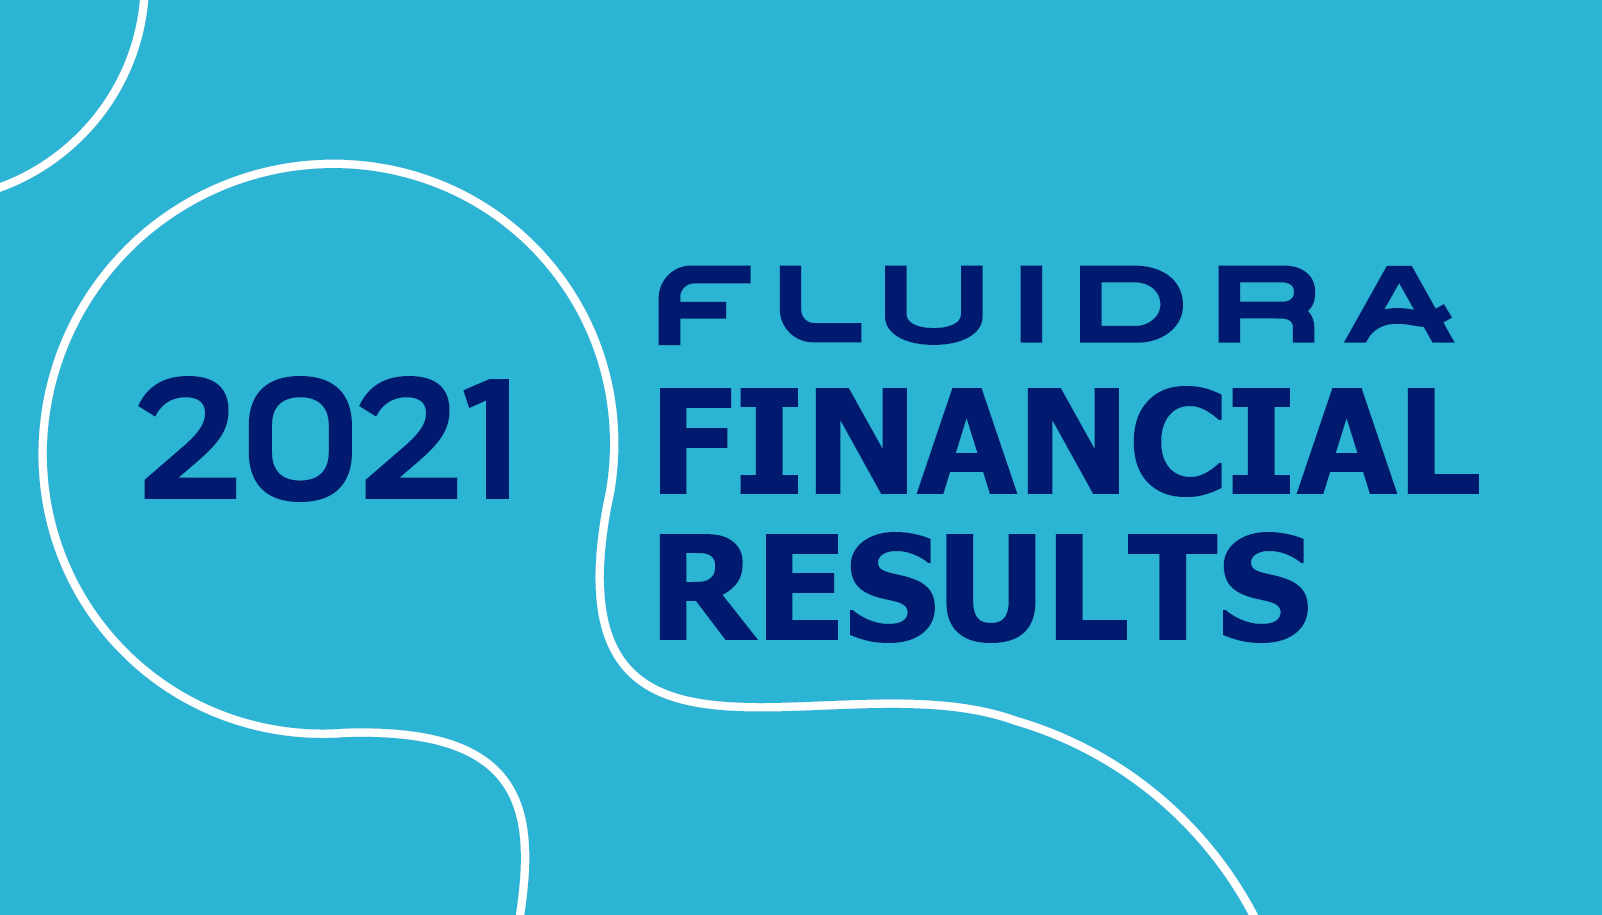 Fluidra closes record year with €2.2 billion sales and €252 million net profit